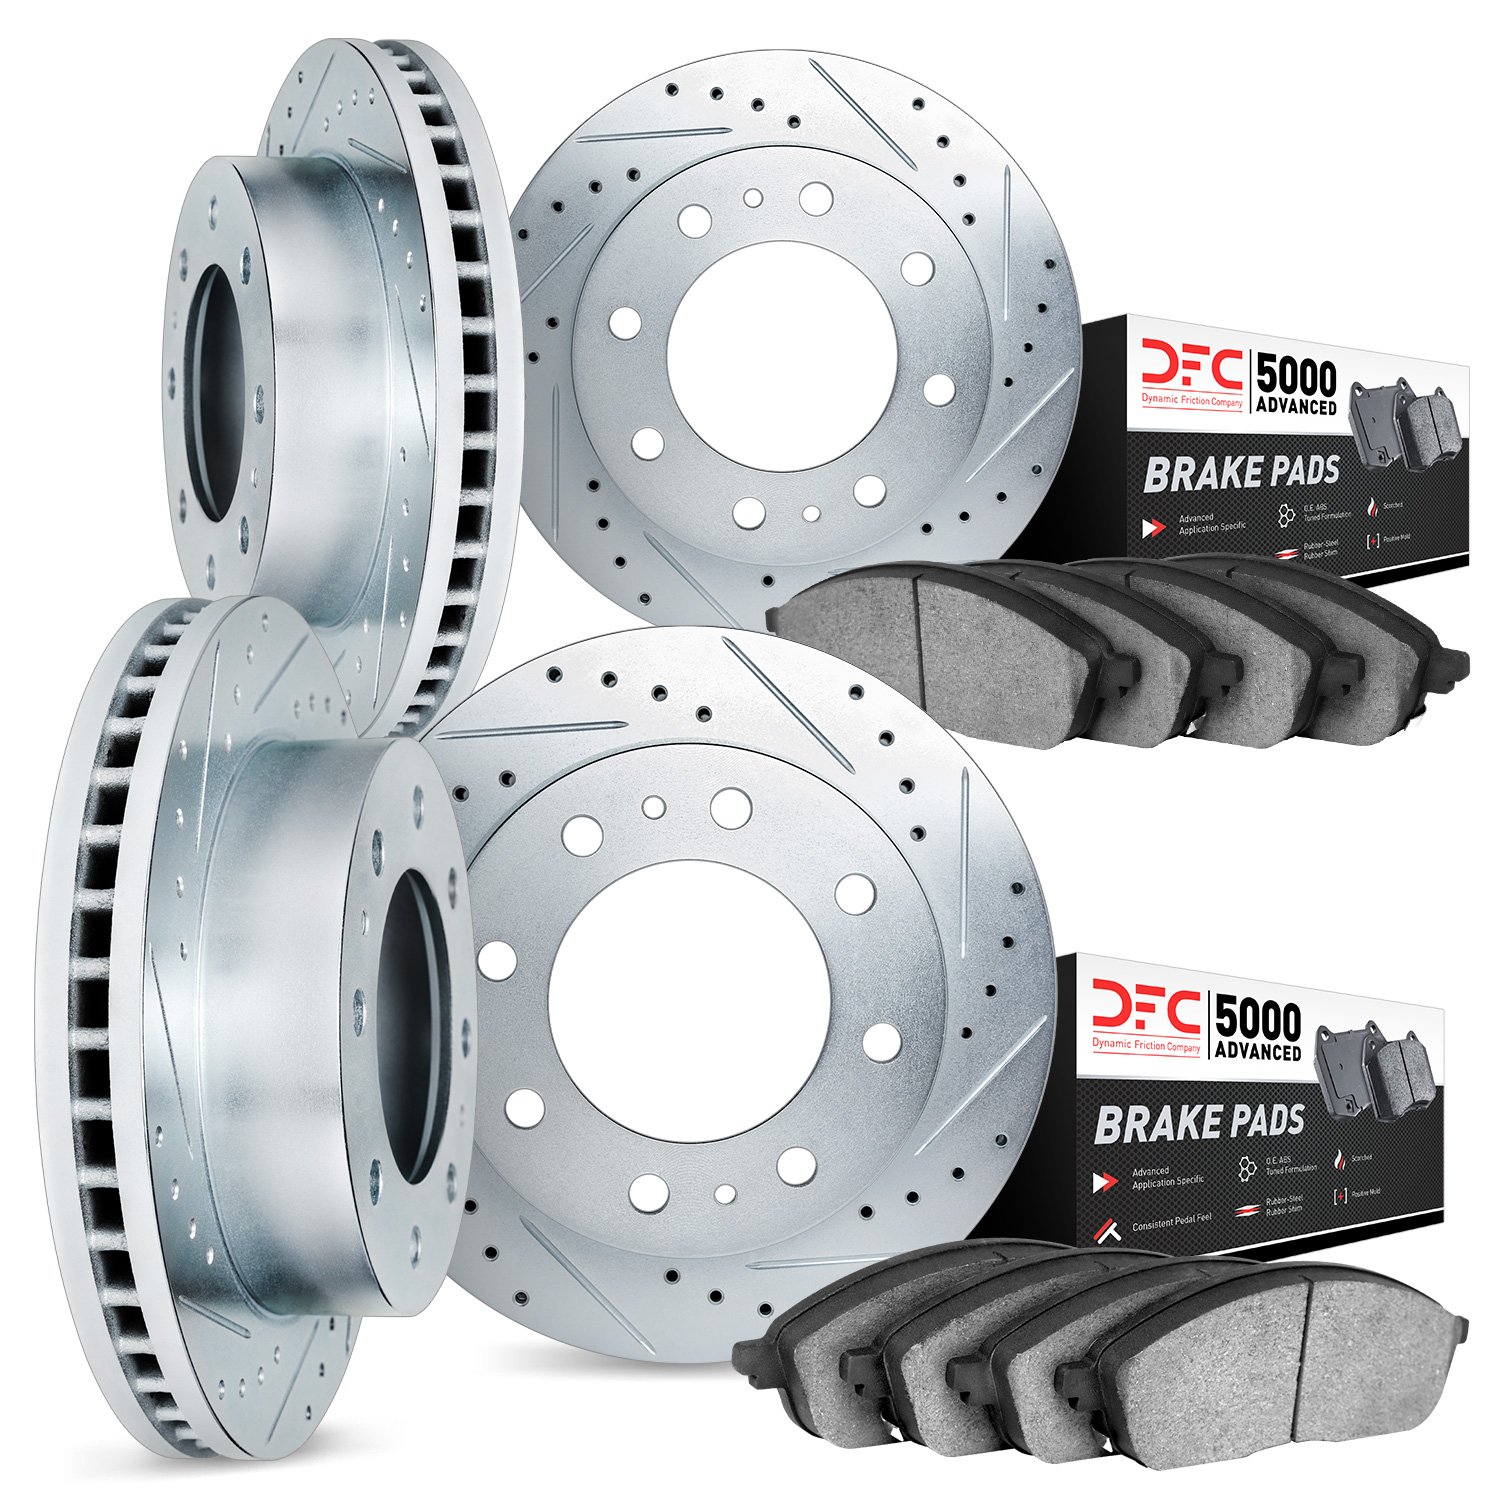 7504-54339 Drilled/Slotted Brake Rotors w/5000 Advanced Brake Pads Kit [Silver], 2003-2005 Ford/Lincoln/Mercury/Mazda, Position: